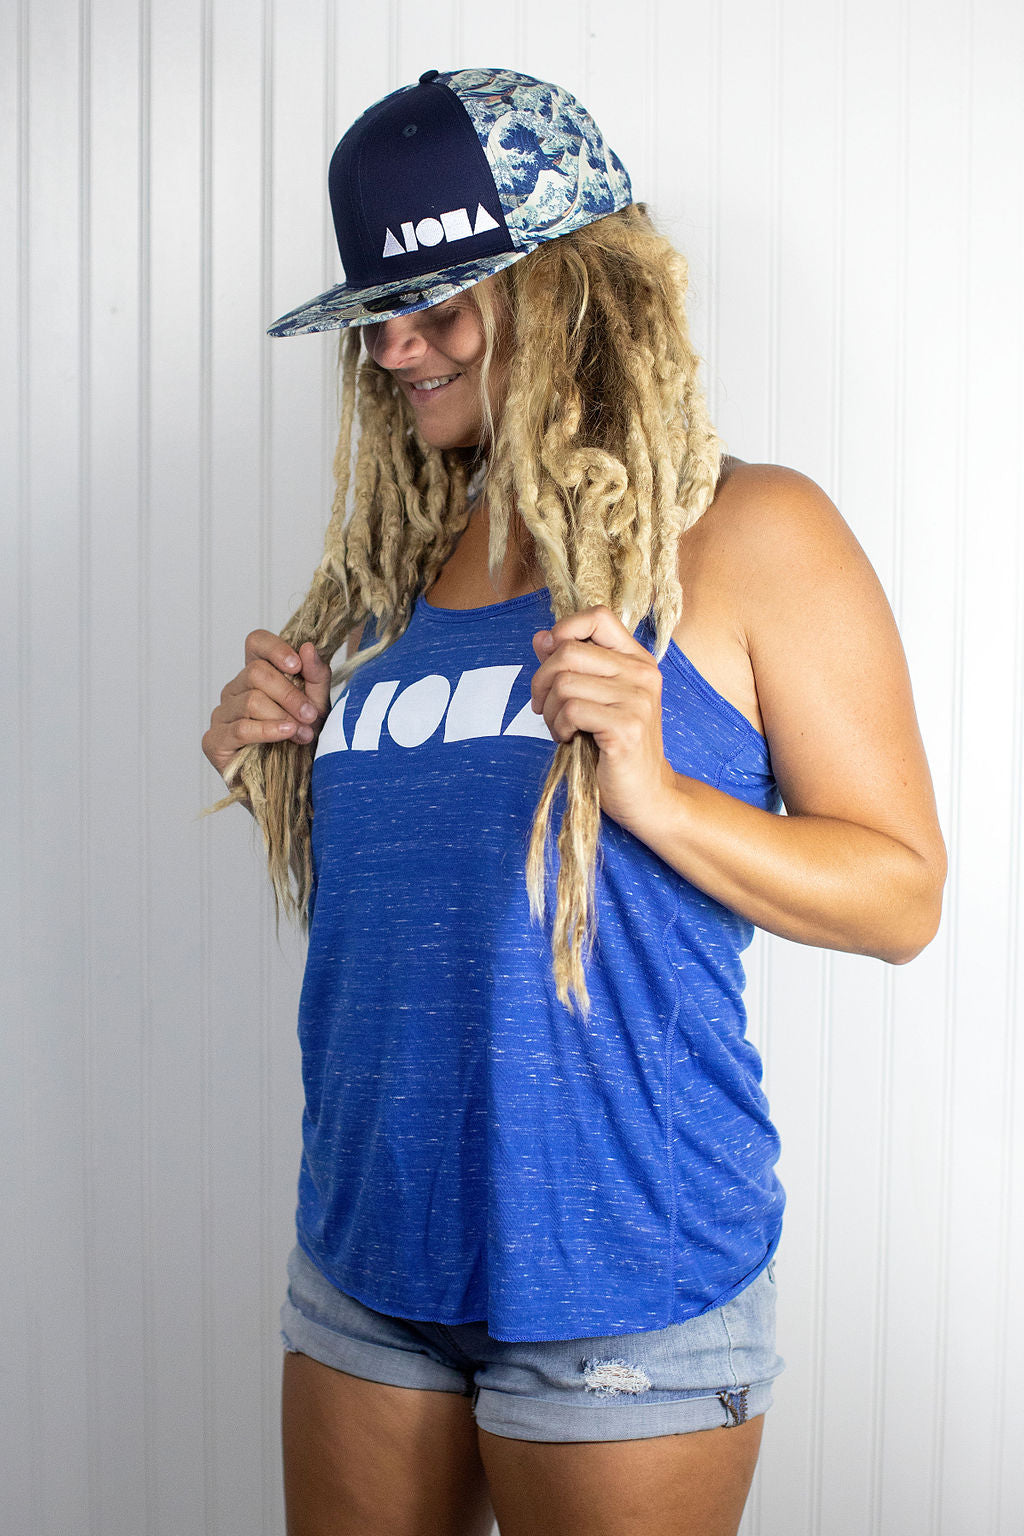 Blond dreadlocked girl wearing an Aloha Shapes ® racerback tank and "Waves for days" snapback hat